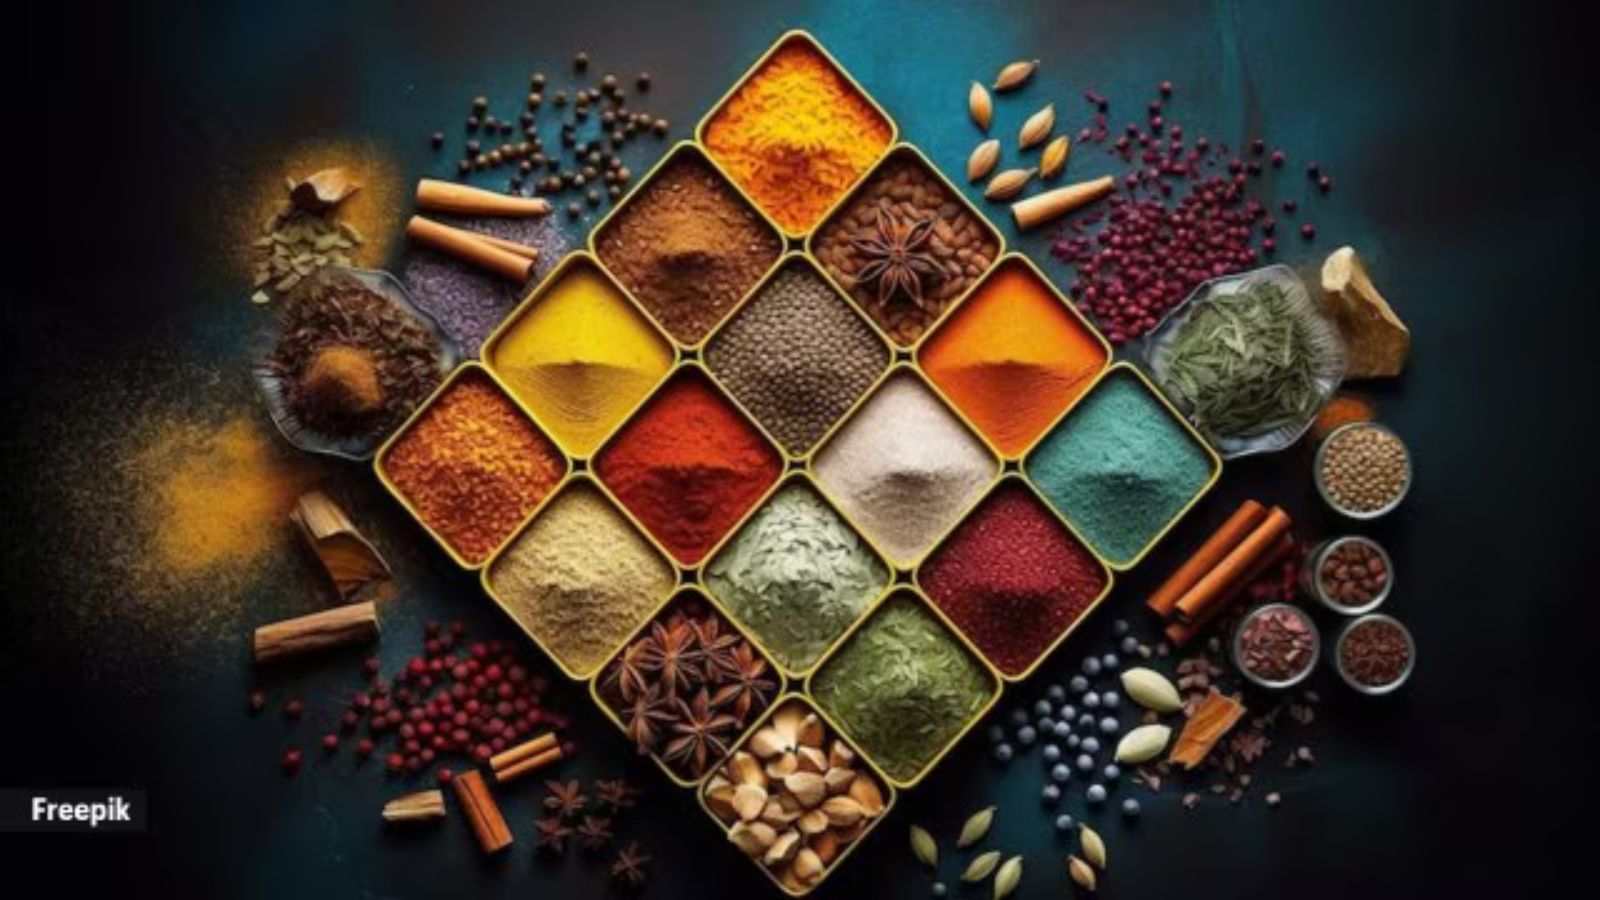 Is your masala pack upping your cancer risk? FSSAI to test samples of MDH, Everest spice mixes after Hong Kong, Singapore withdraw them over contaminant - The Indian Express